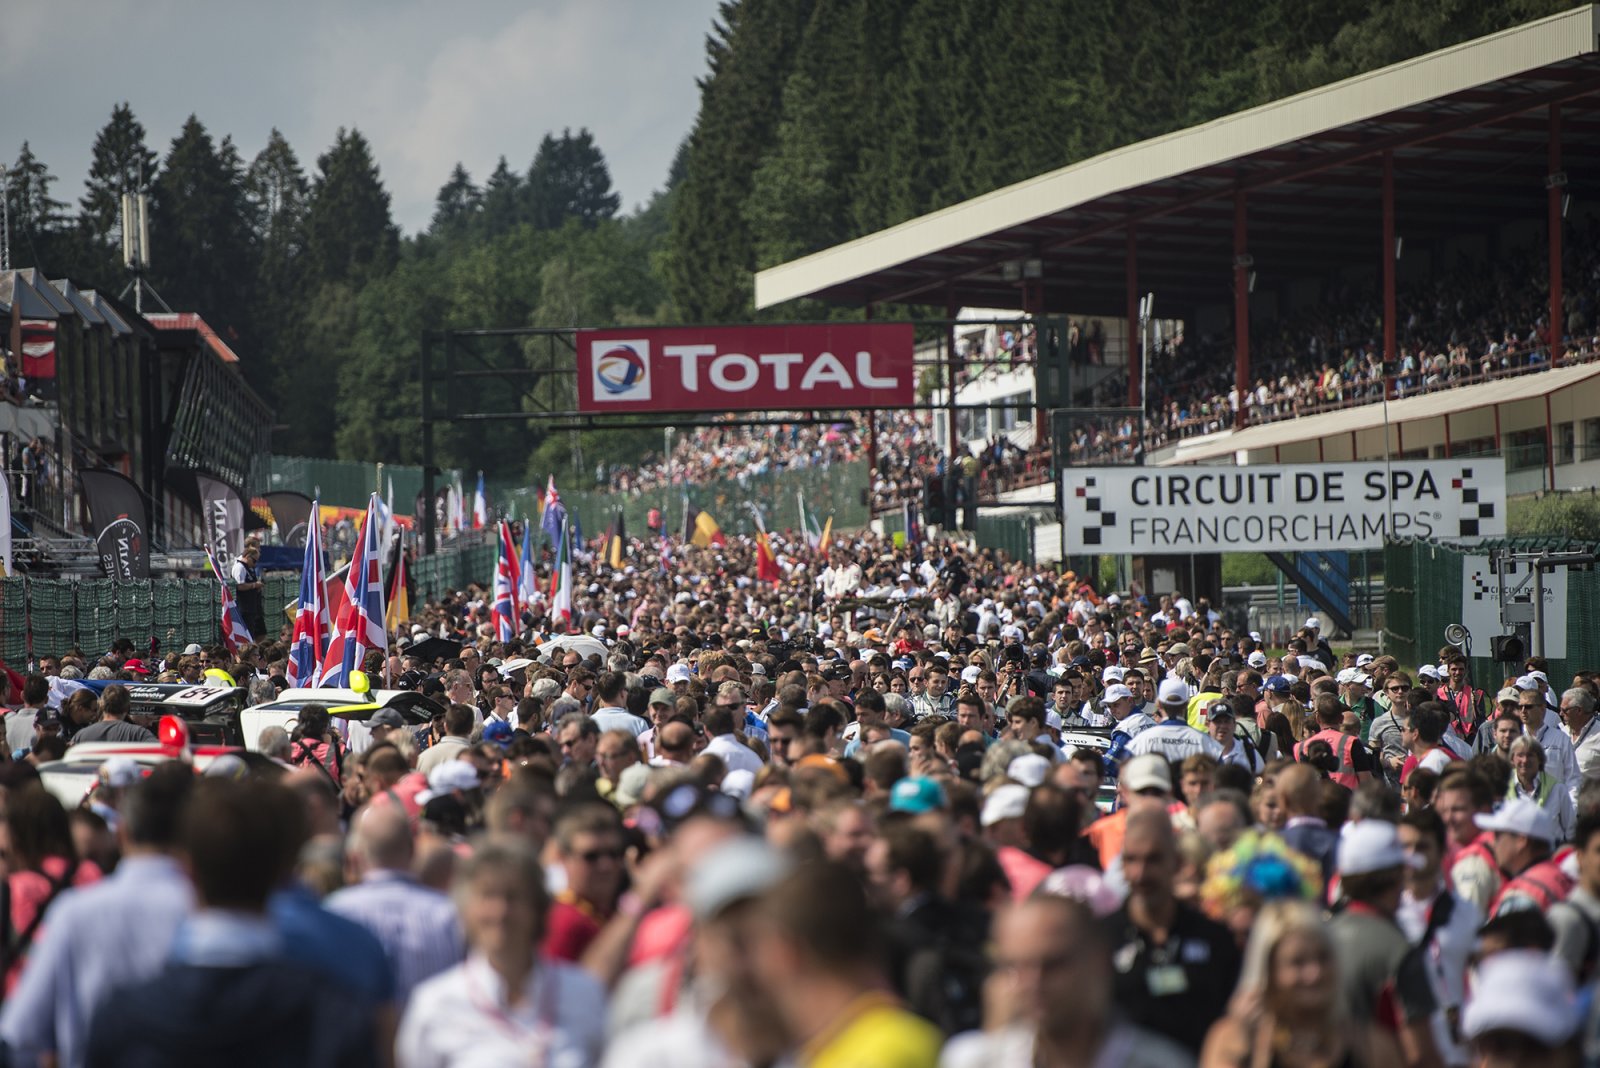 Tickets for Total 24 Hours of Spa now on sale - Race Tickets include free entrance to practice and qualifying on Thursday and Friday